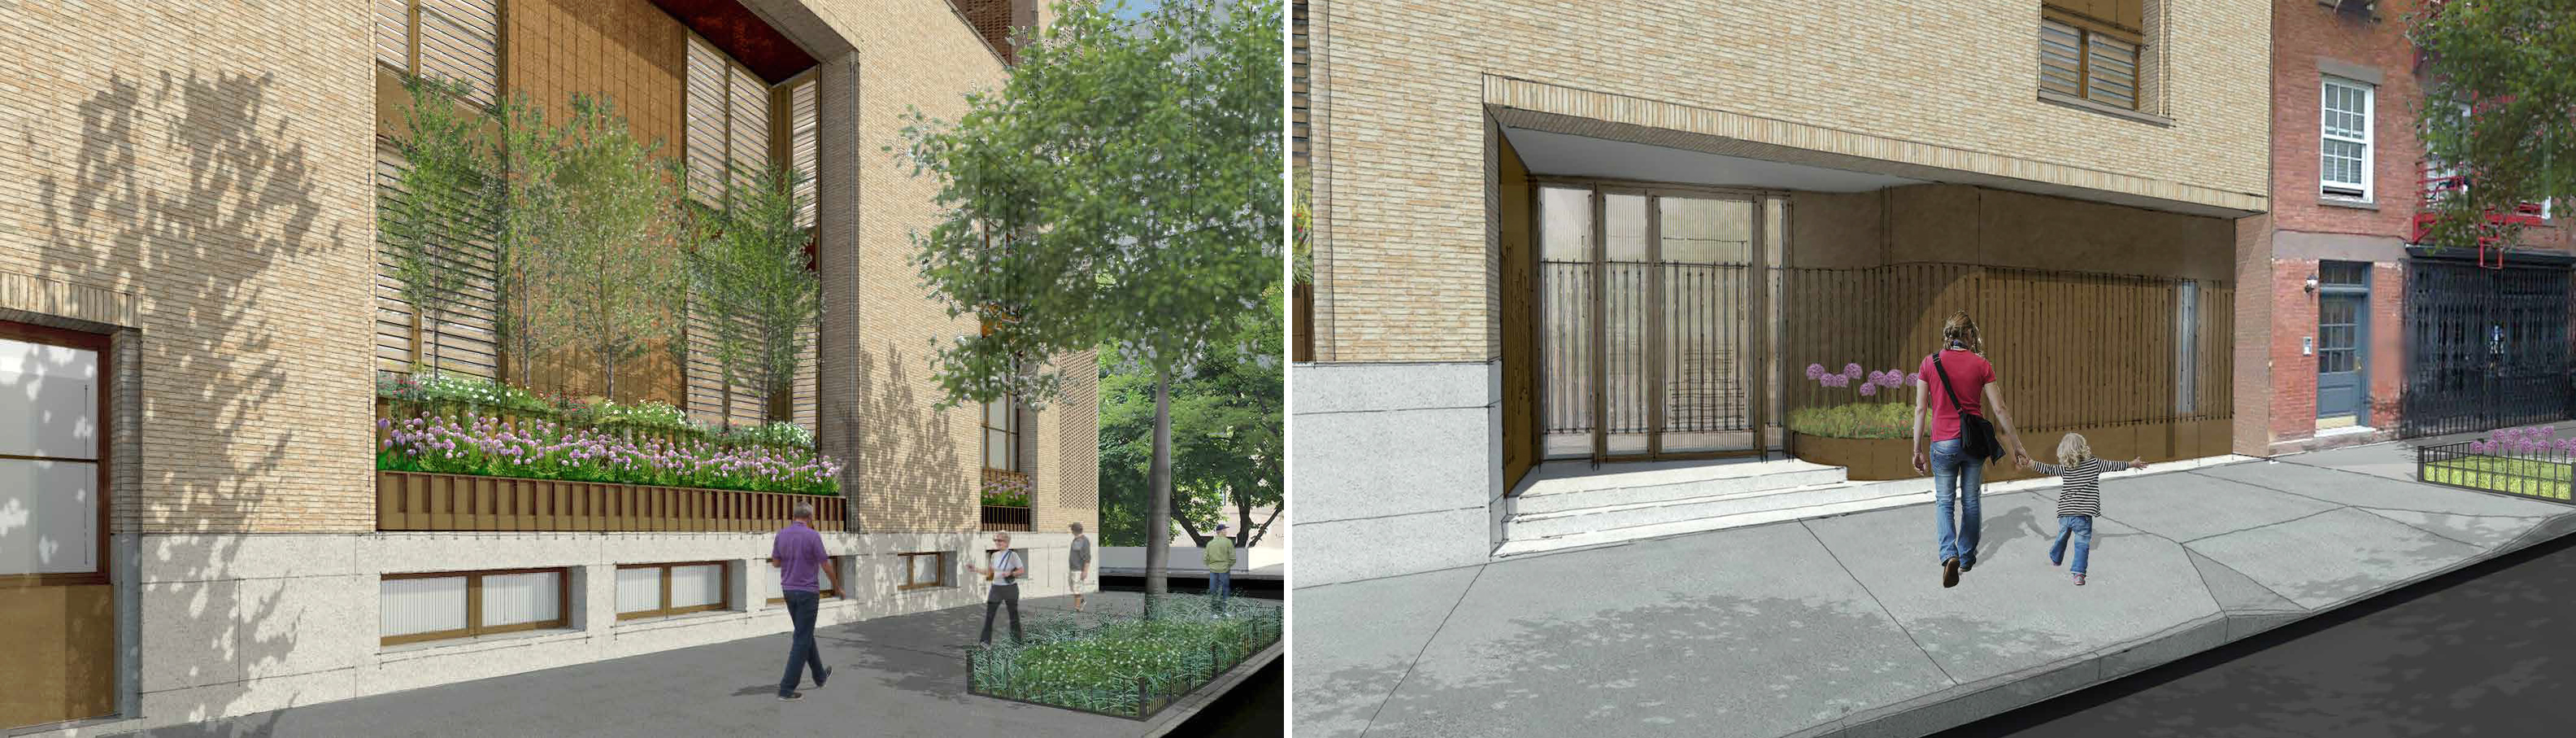 Proposal for 145 Perry Street (a.k.a. 703-711 Washington Street). Seen here are the planters along Washington Street and the primary townhouse entrance on Perry Street.